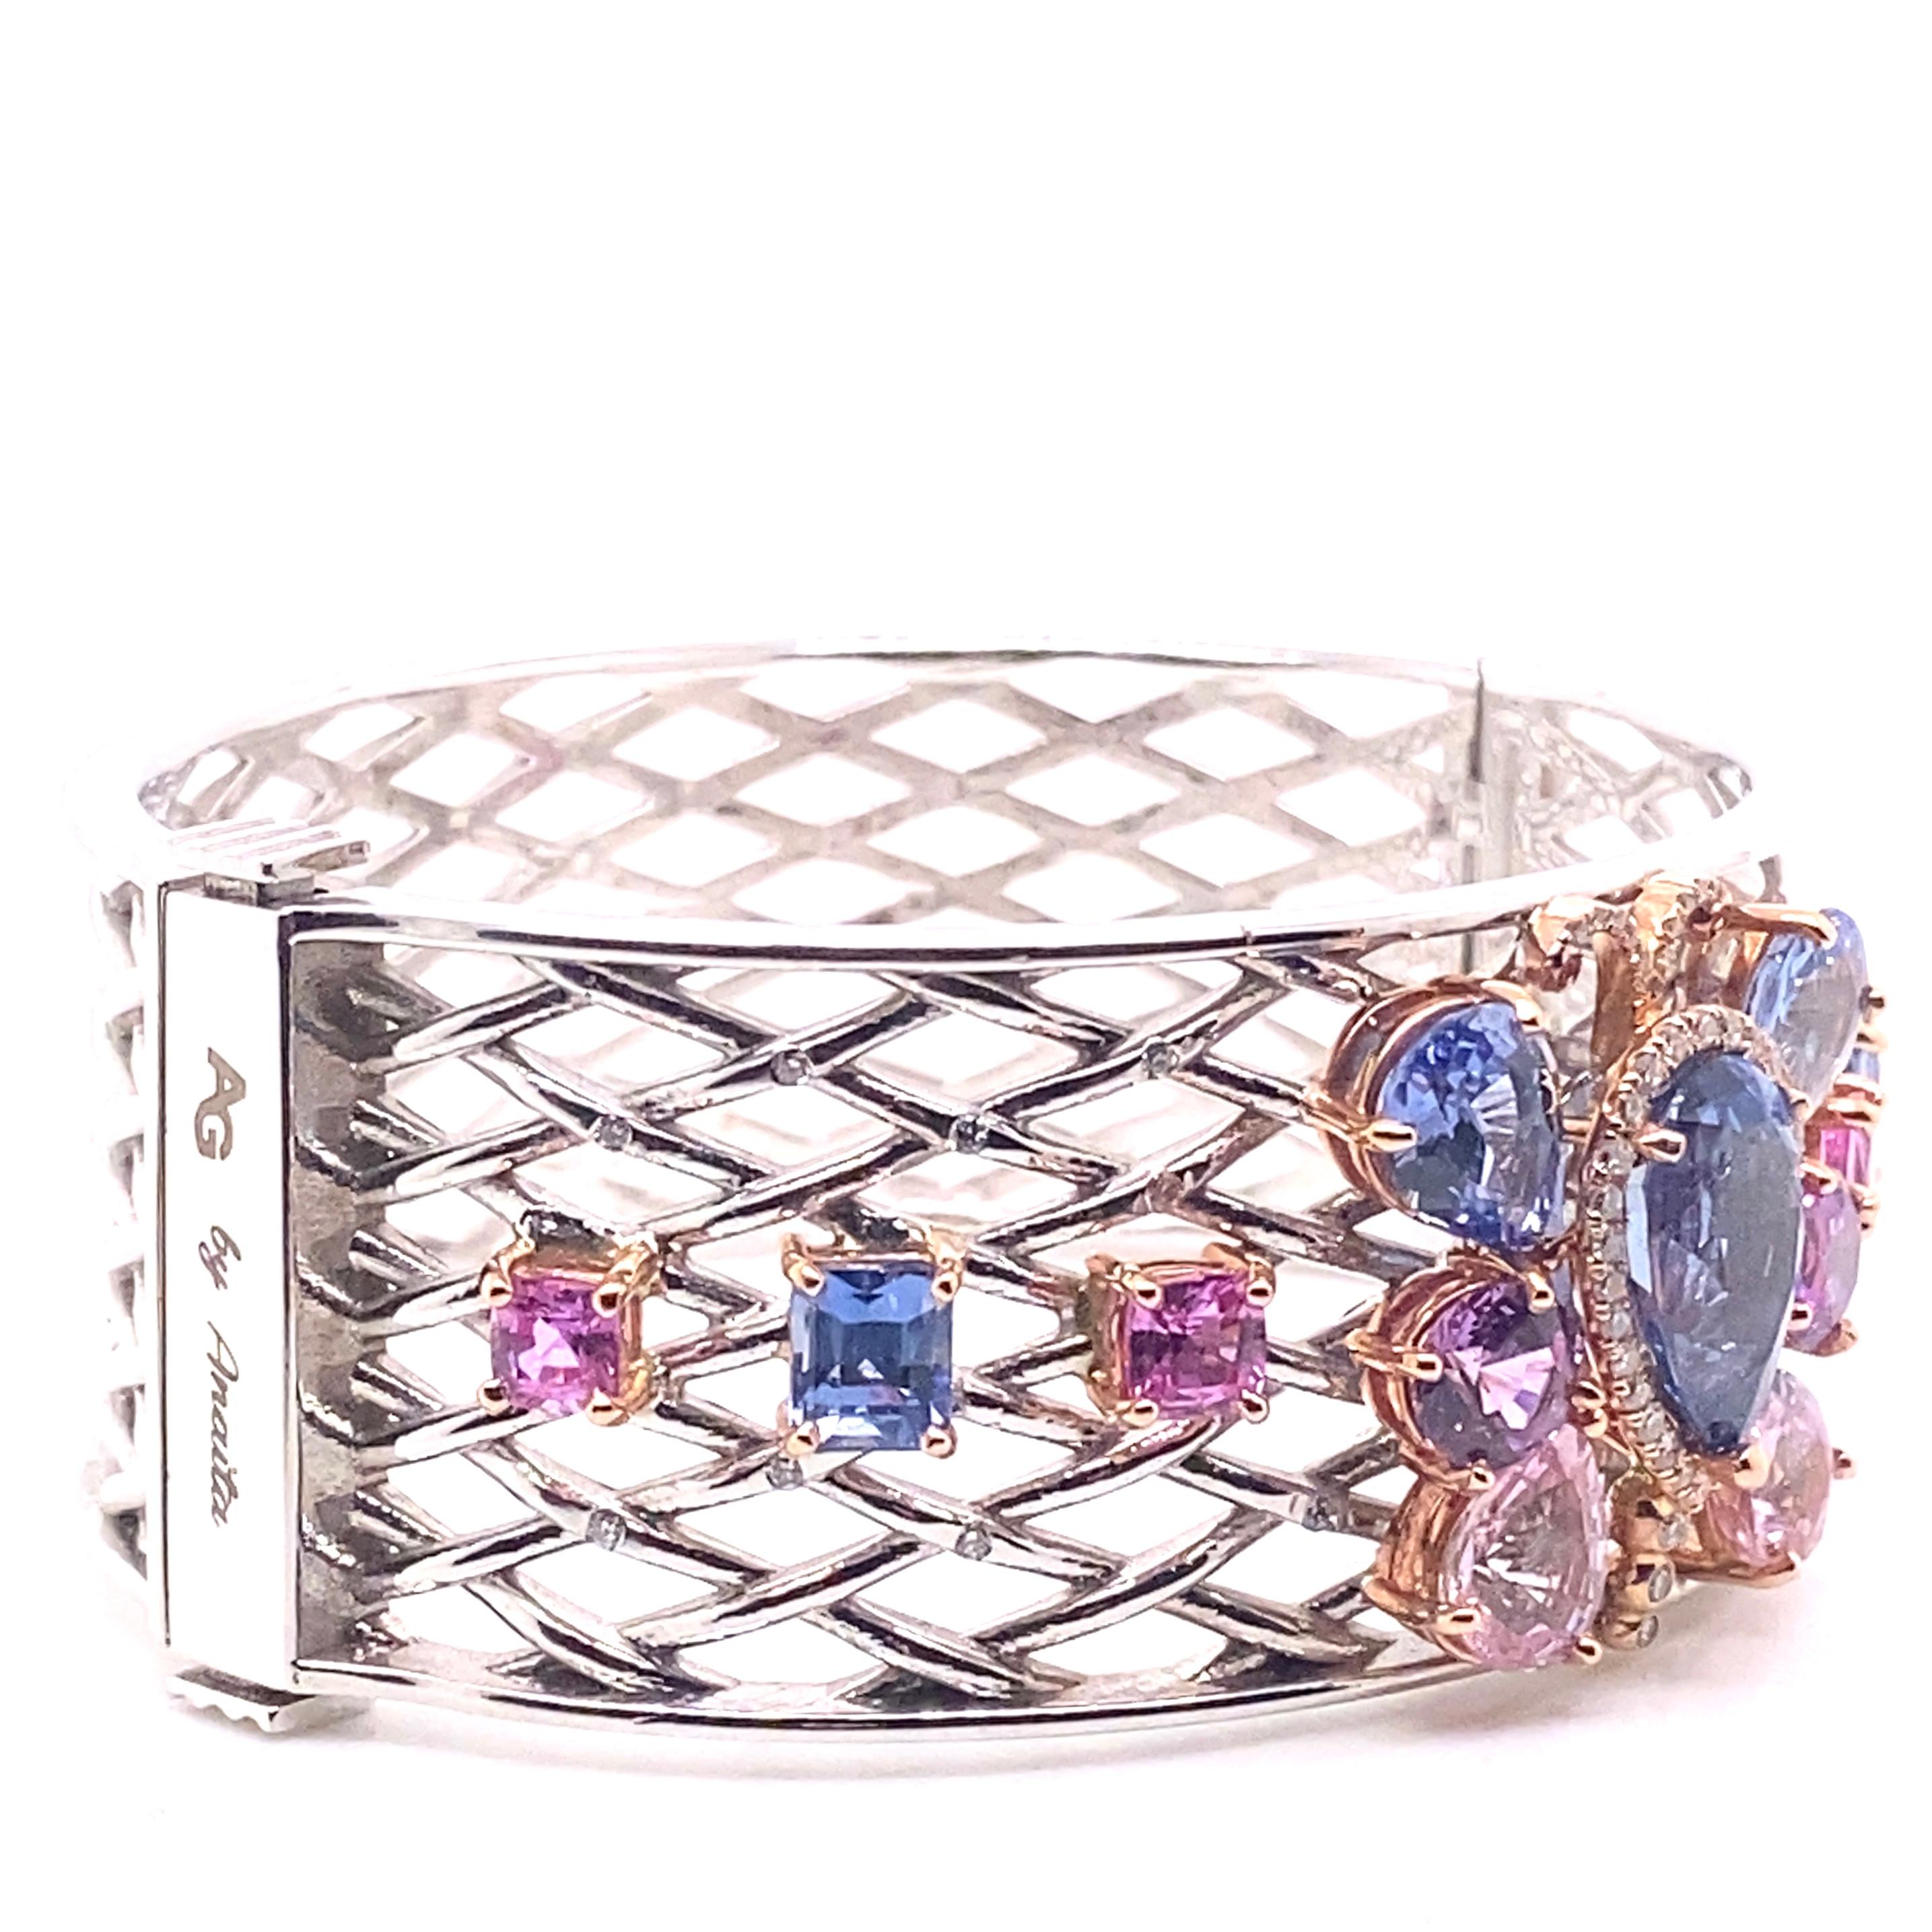 An 18 karat white gold open lattice hinged cuff bracelet featuring GIA certified natural blue, pink, and purple sapphires totaling 20.17 carats set in 18 karat rose gold. The middle sapphire is surrounded .41 carats of round diamonds. The main